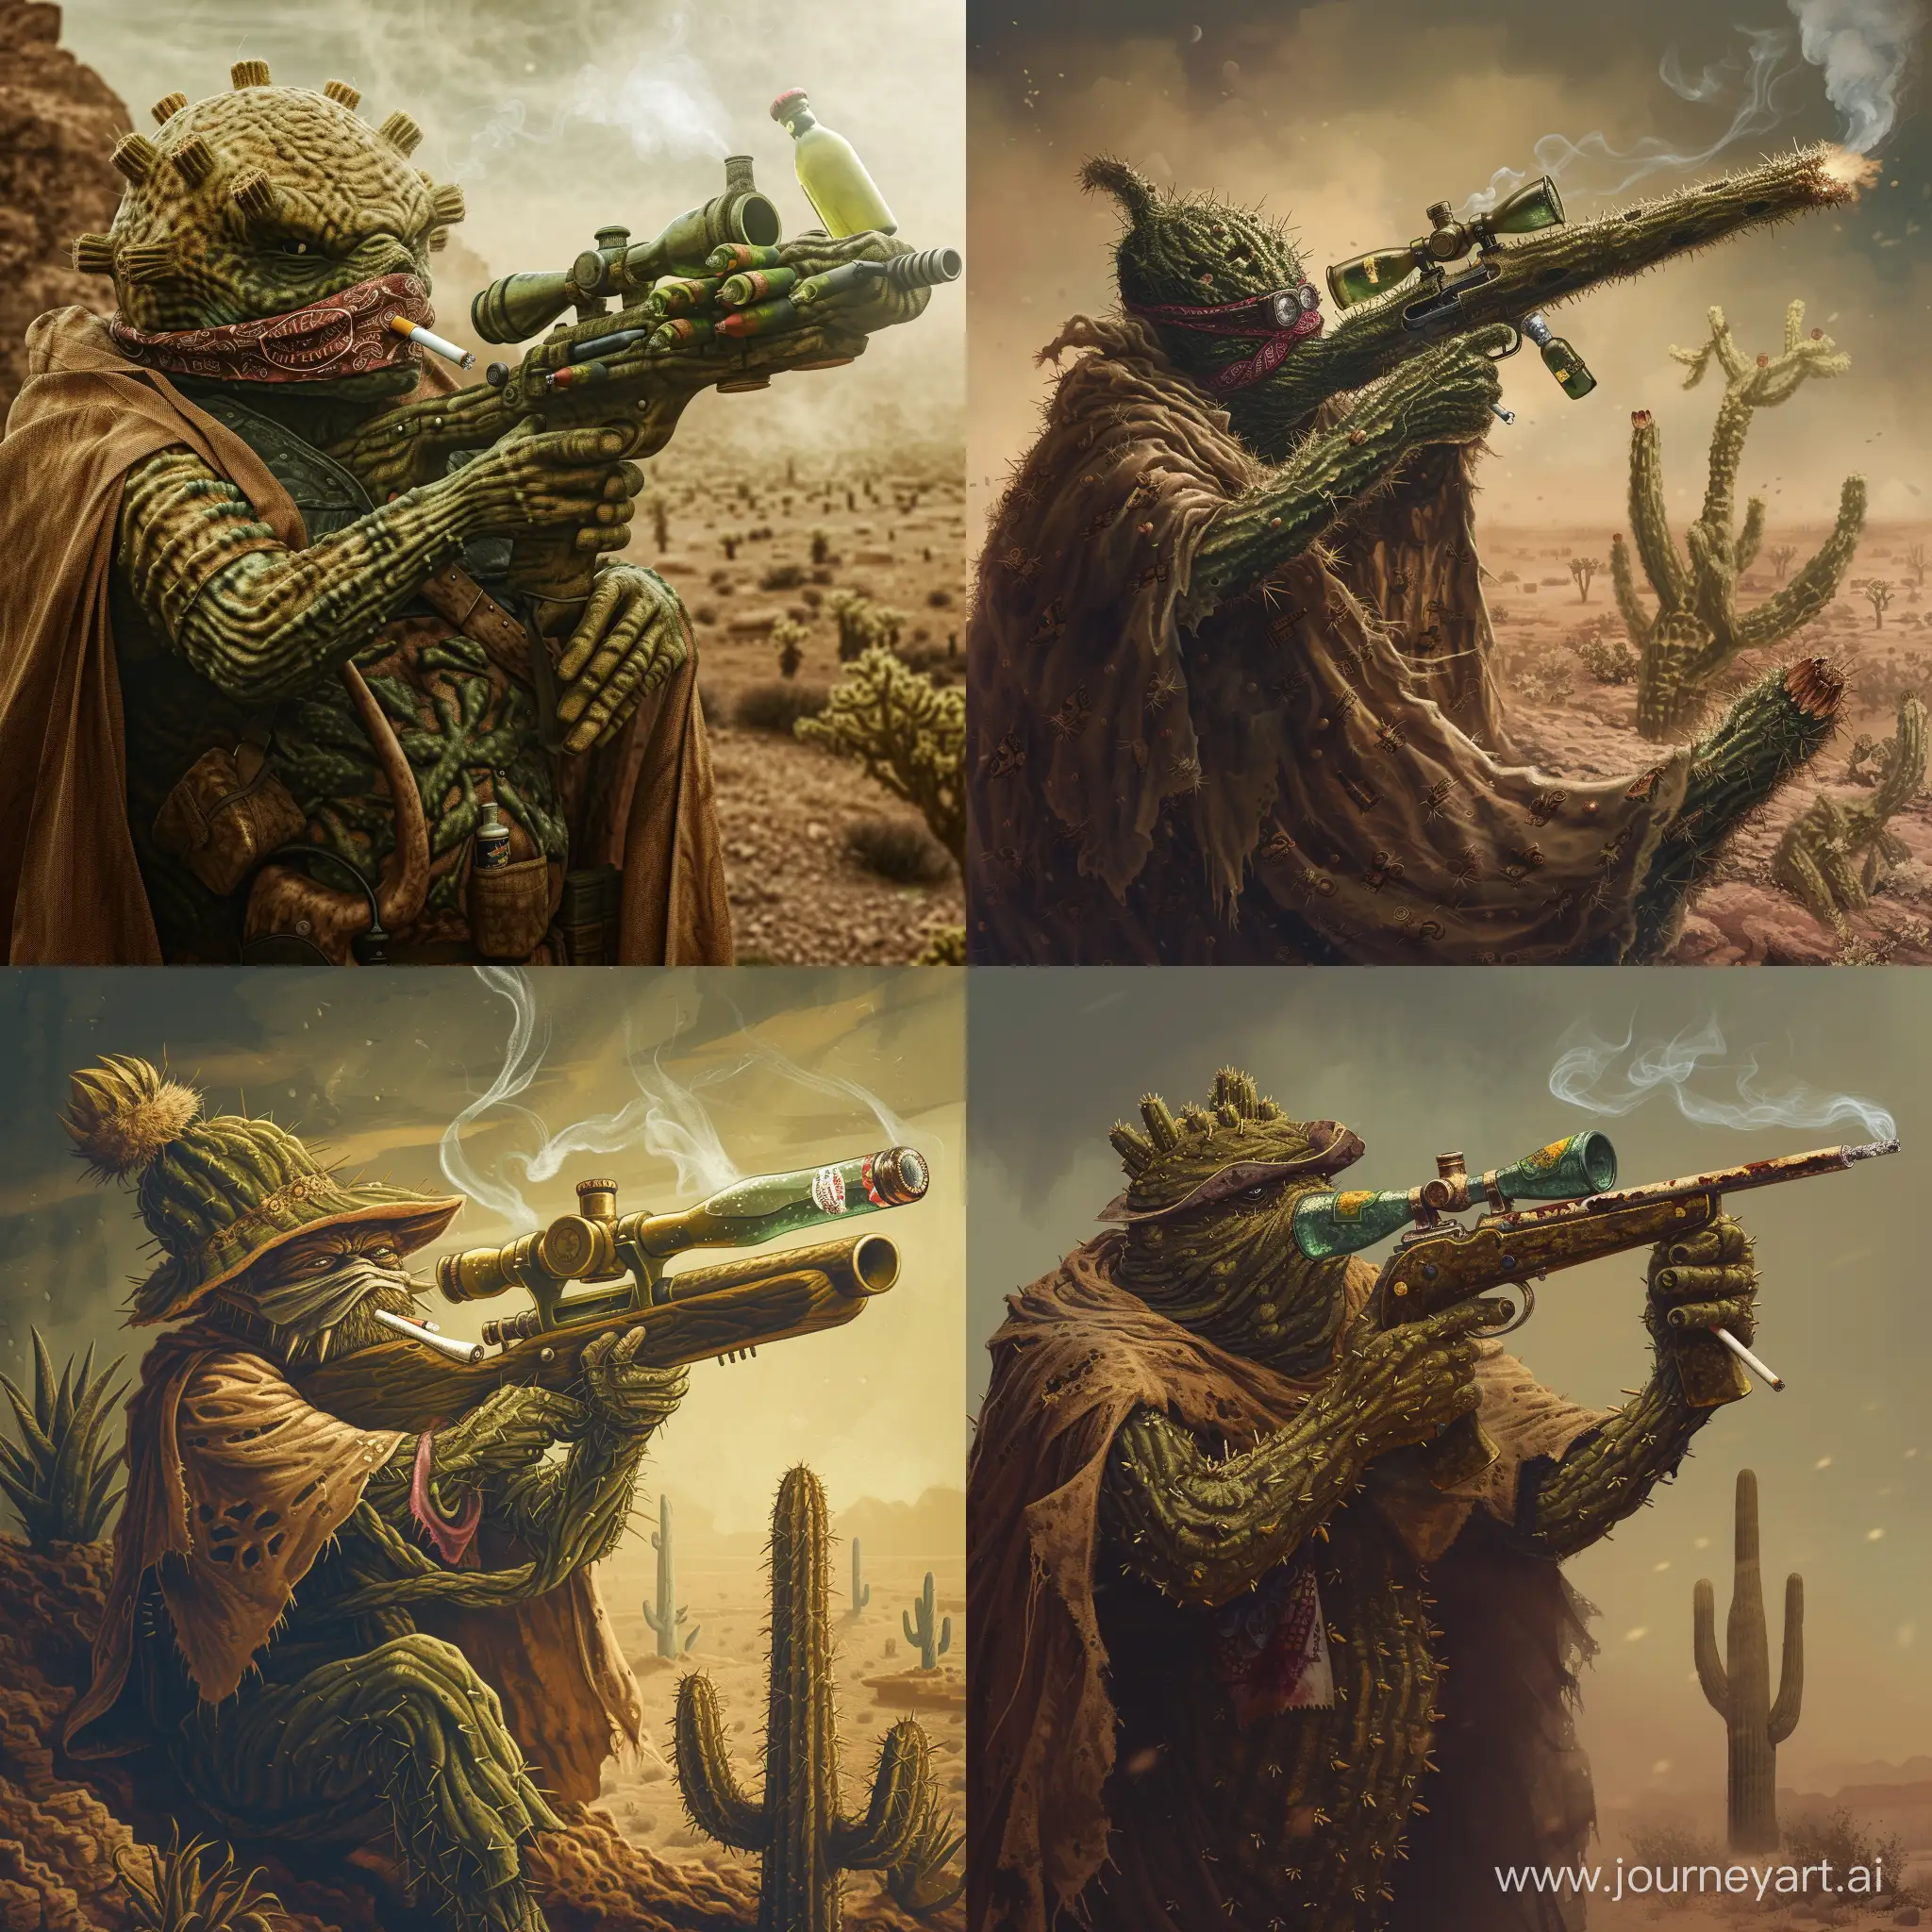 a dune humanoid cactus man wielding a cactus sniper with bottles on its scope, smokes a cigarette, wears a bandana, wears a poncho, menacing,  in a middle of a desert ,1970's dark fantasy style, gritty, dark, vintage, detailed